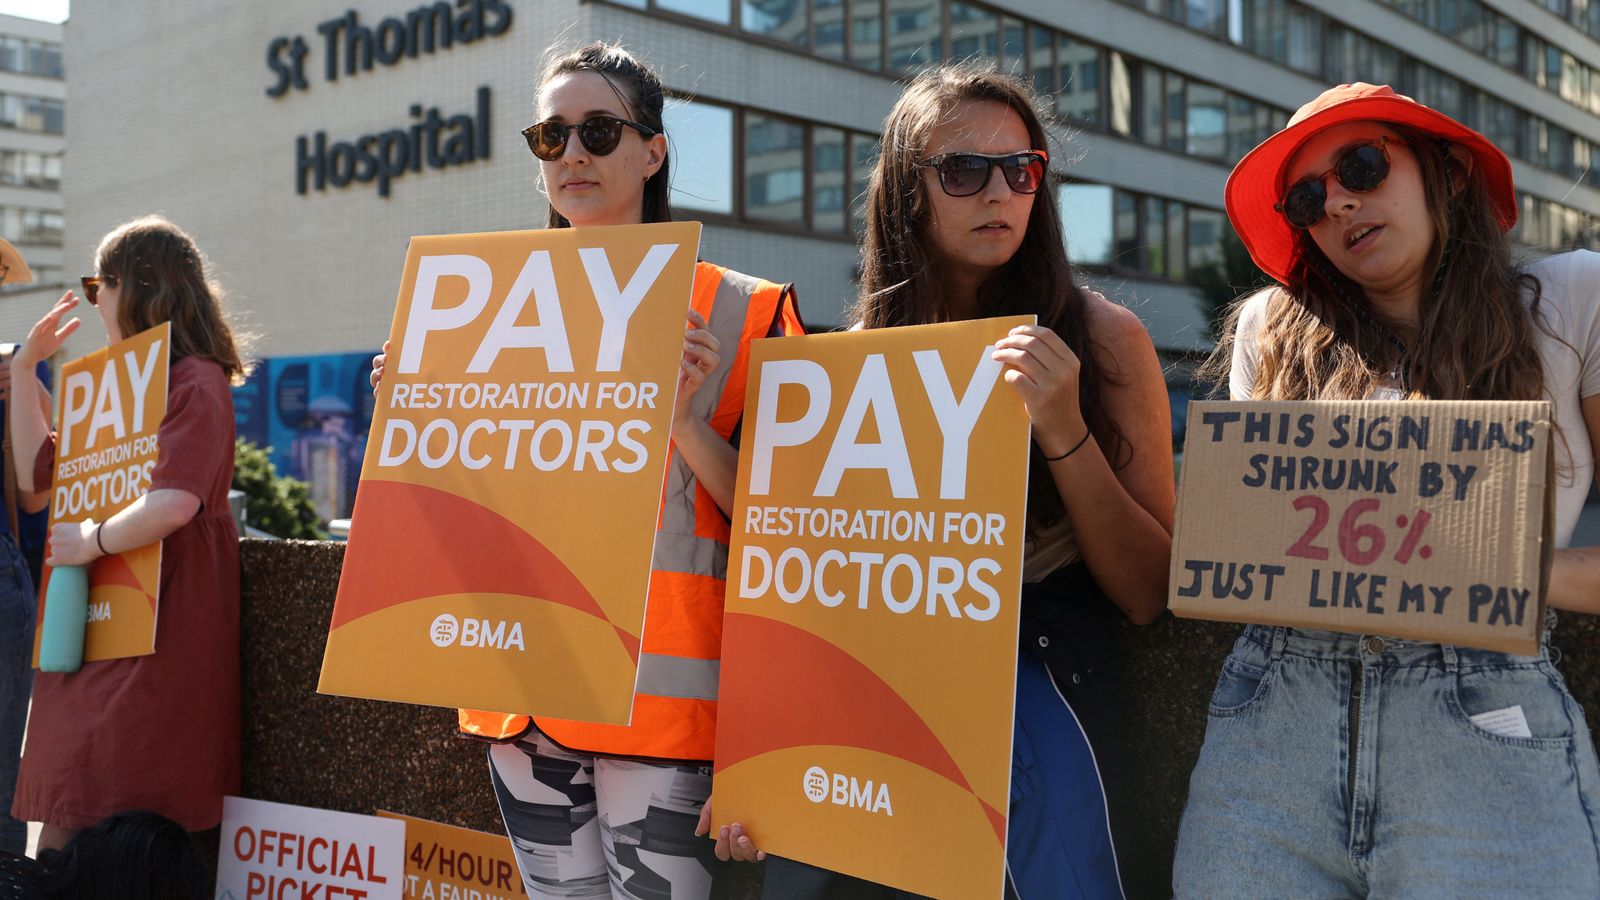 Junior doctors and consultants to go on joint strike for first time in NHS history